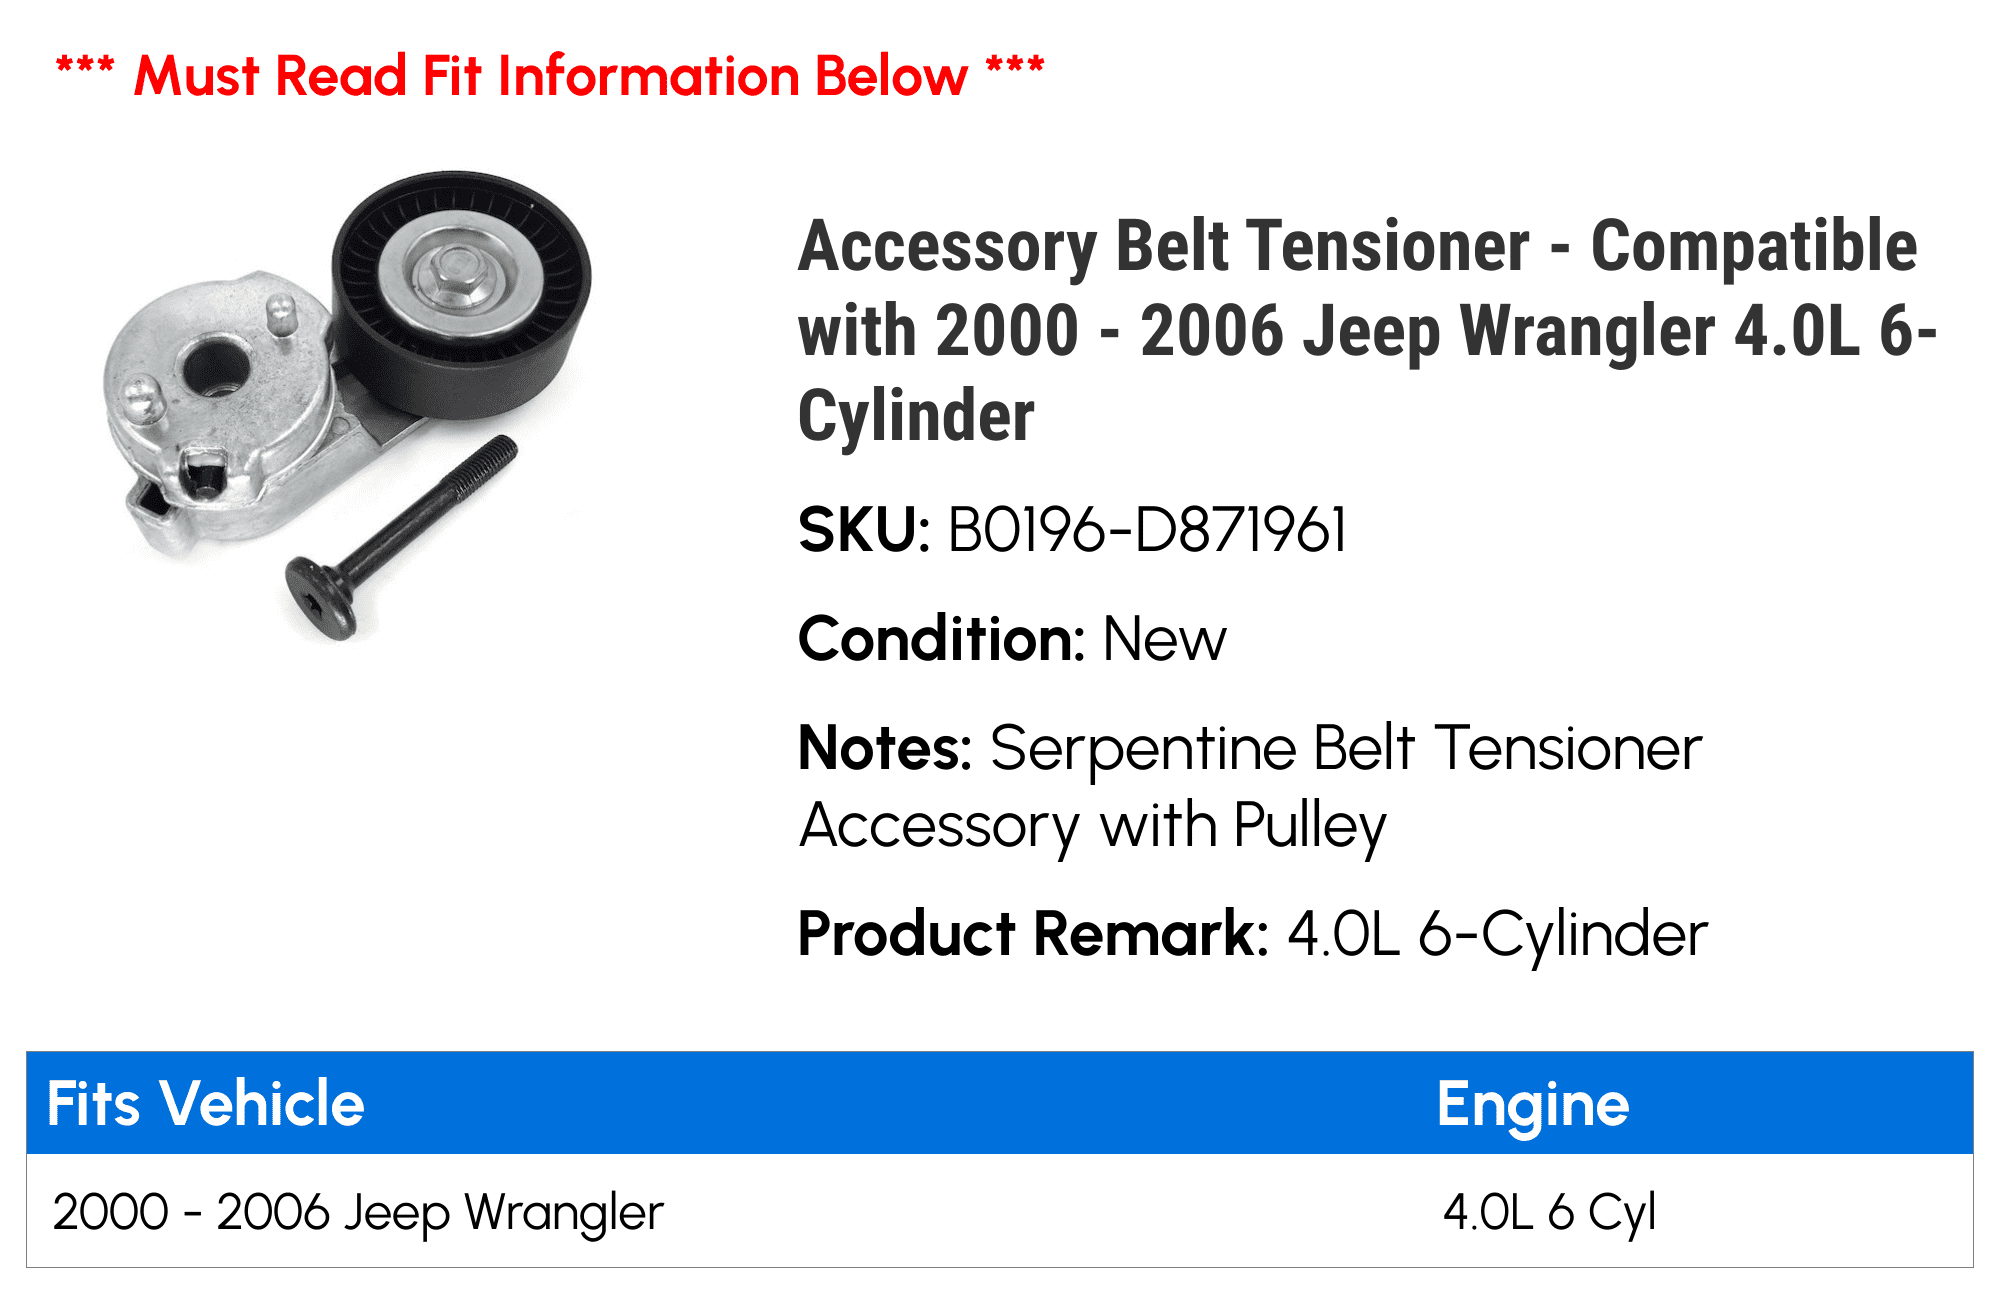 Accessory Belt Tensioner - Compatible with 2000 - 2006 Jeep Wrangler   6-Cylinder 2001 2002 2003 2004 2005 